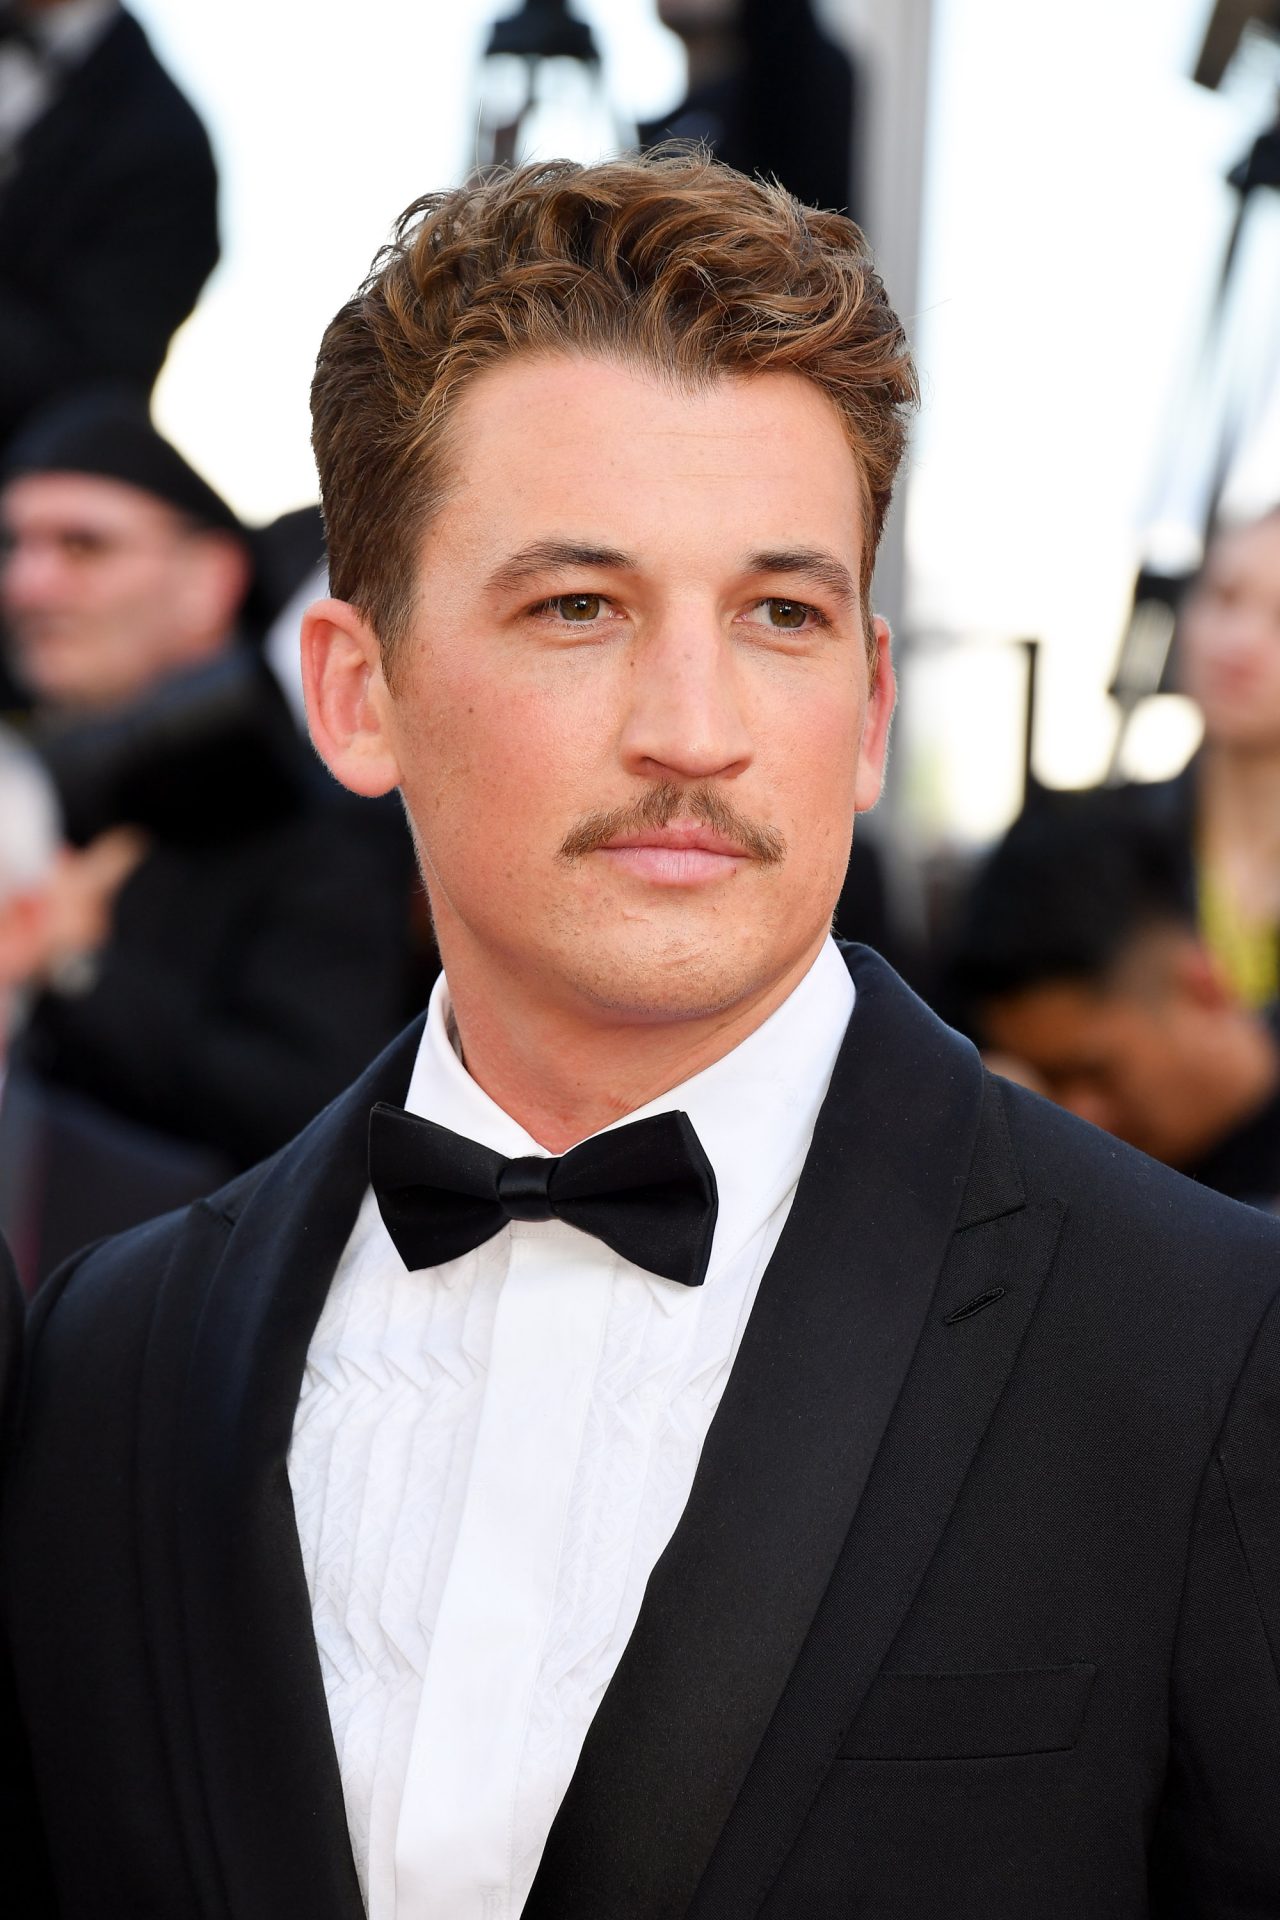 CANNES, FRANCE - MAY 16: Miles Teller attends the screening of "Rocketman" during the 72nd annual Cannes Film Festival on May 16, 2019 in Cannes, France. (Photo by George Pimentel/WireImage)